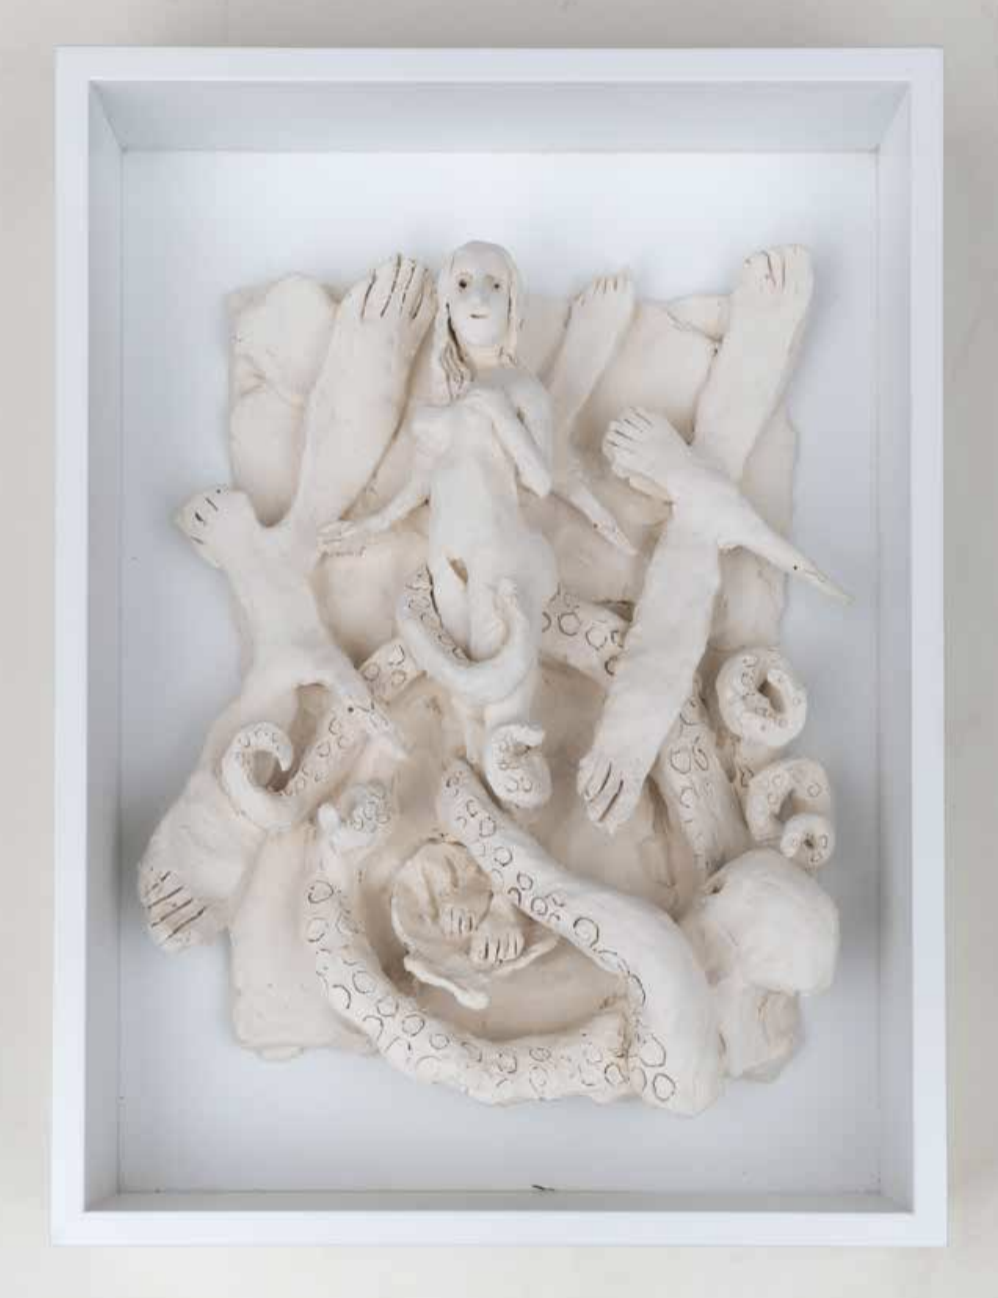   Venus and the Octopus , 2020, Fired clay relief, 17 x 12.75 x 4 in 